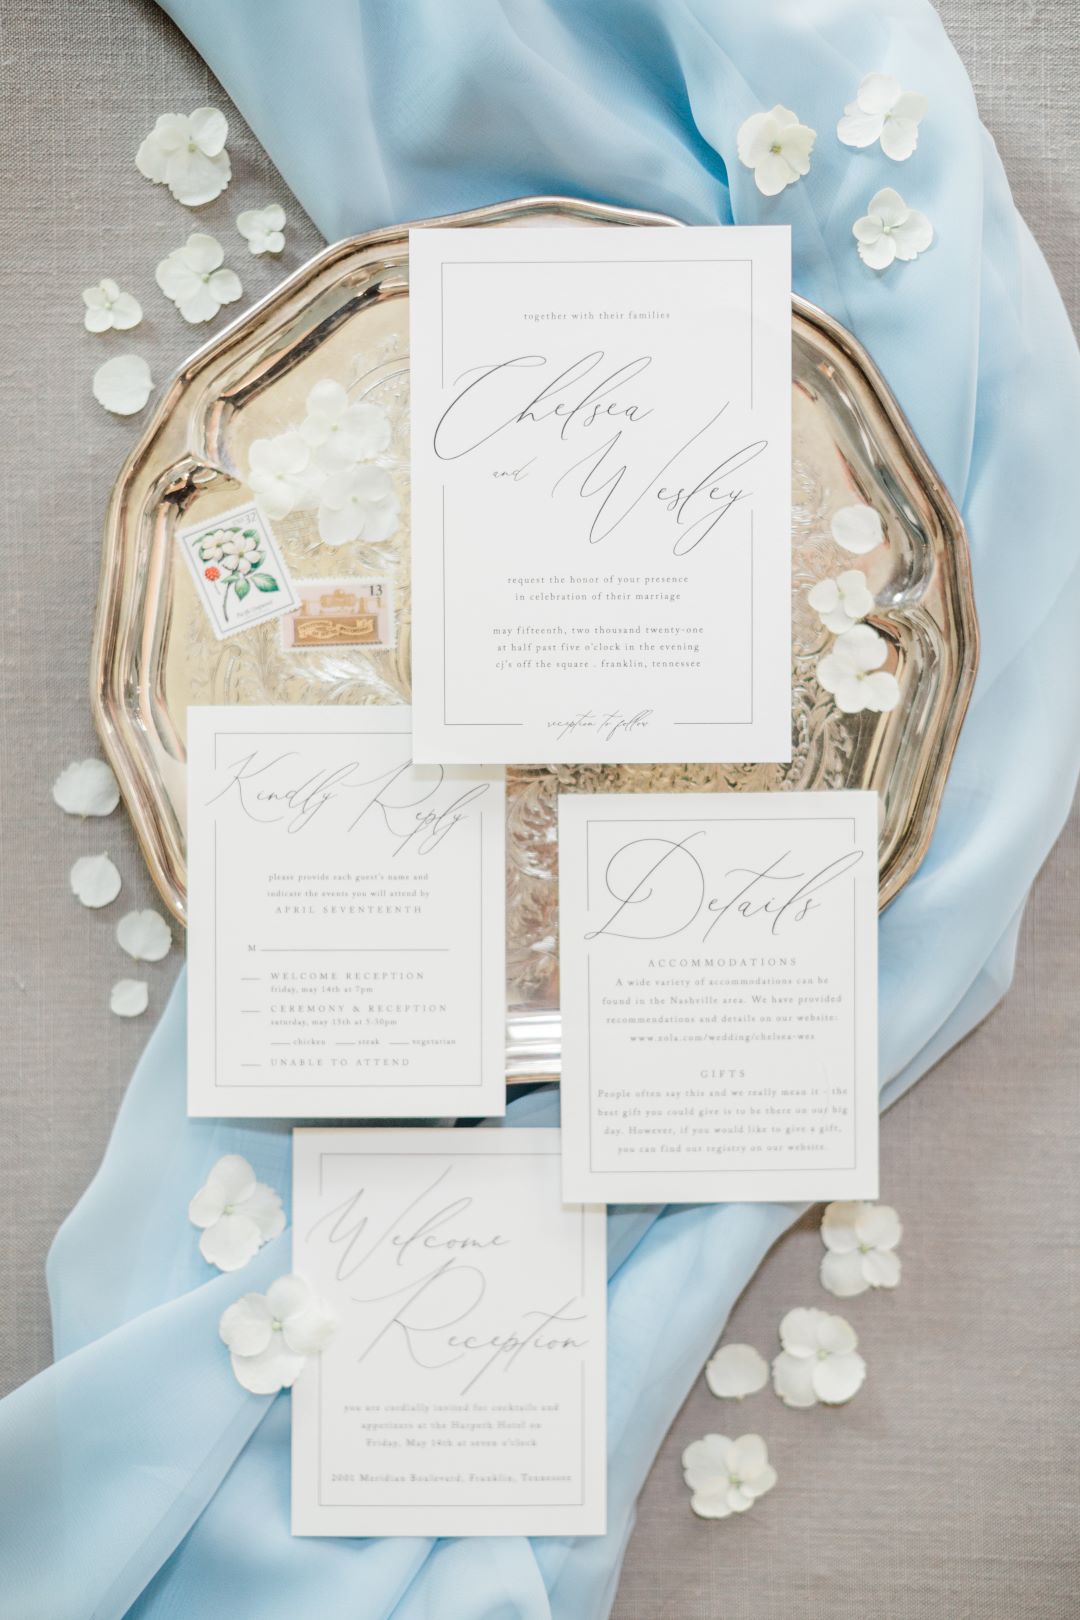 CJ's Off The Square | Wedding invitation suite with blue accents